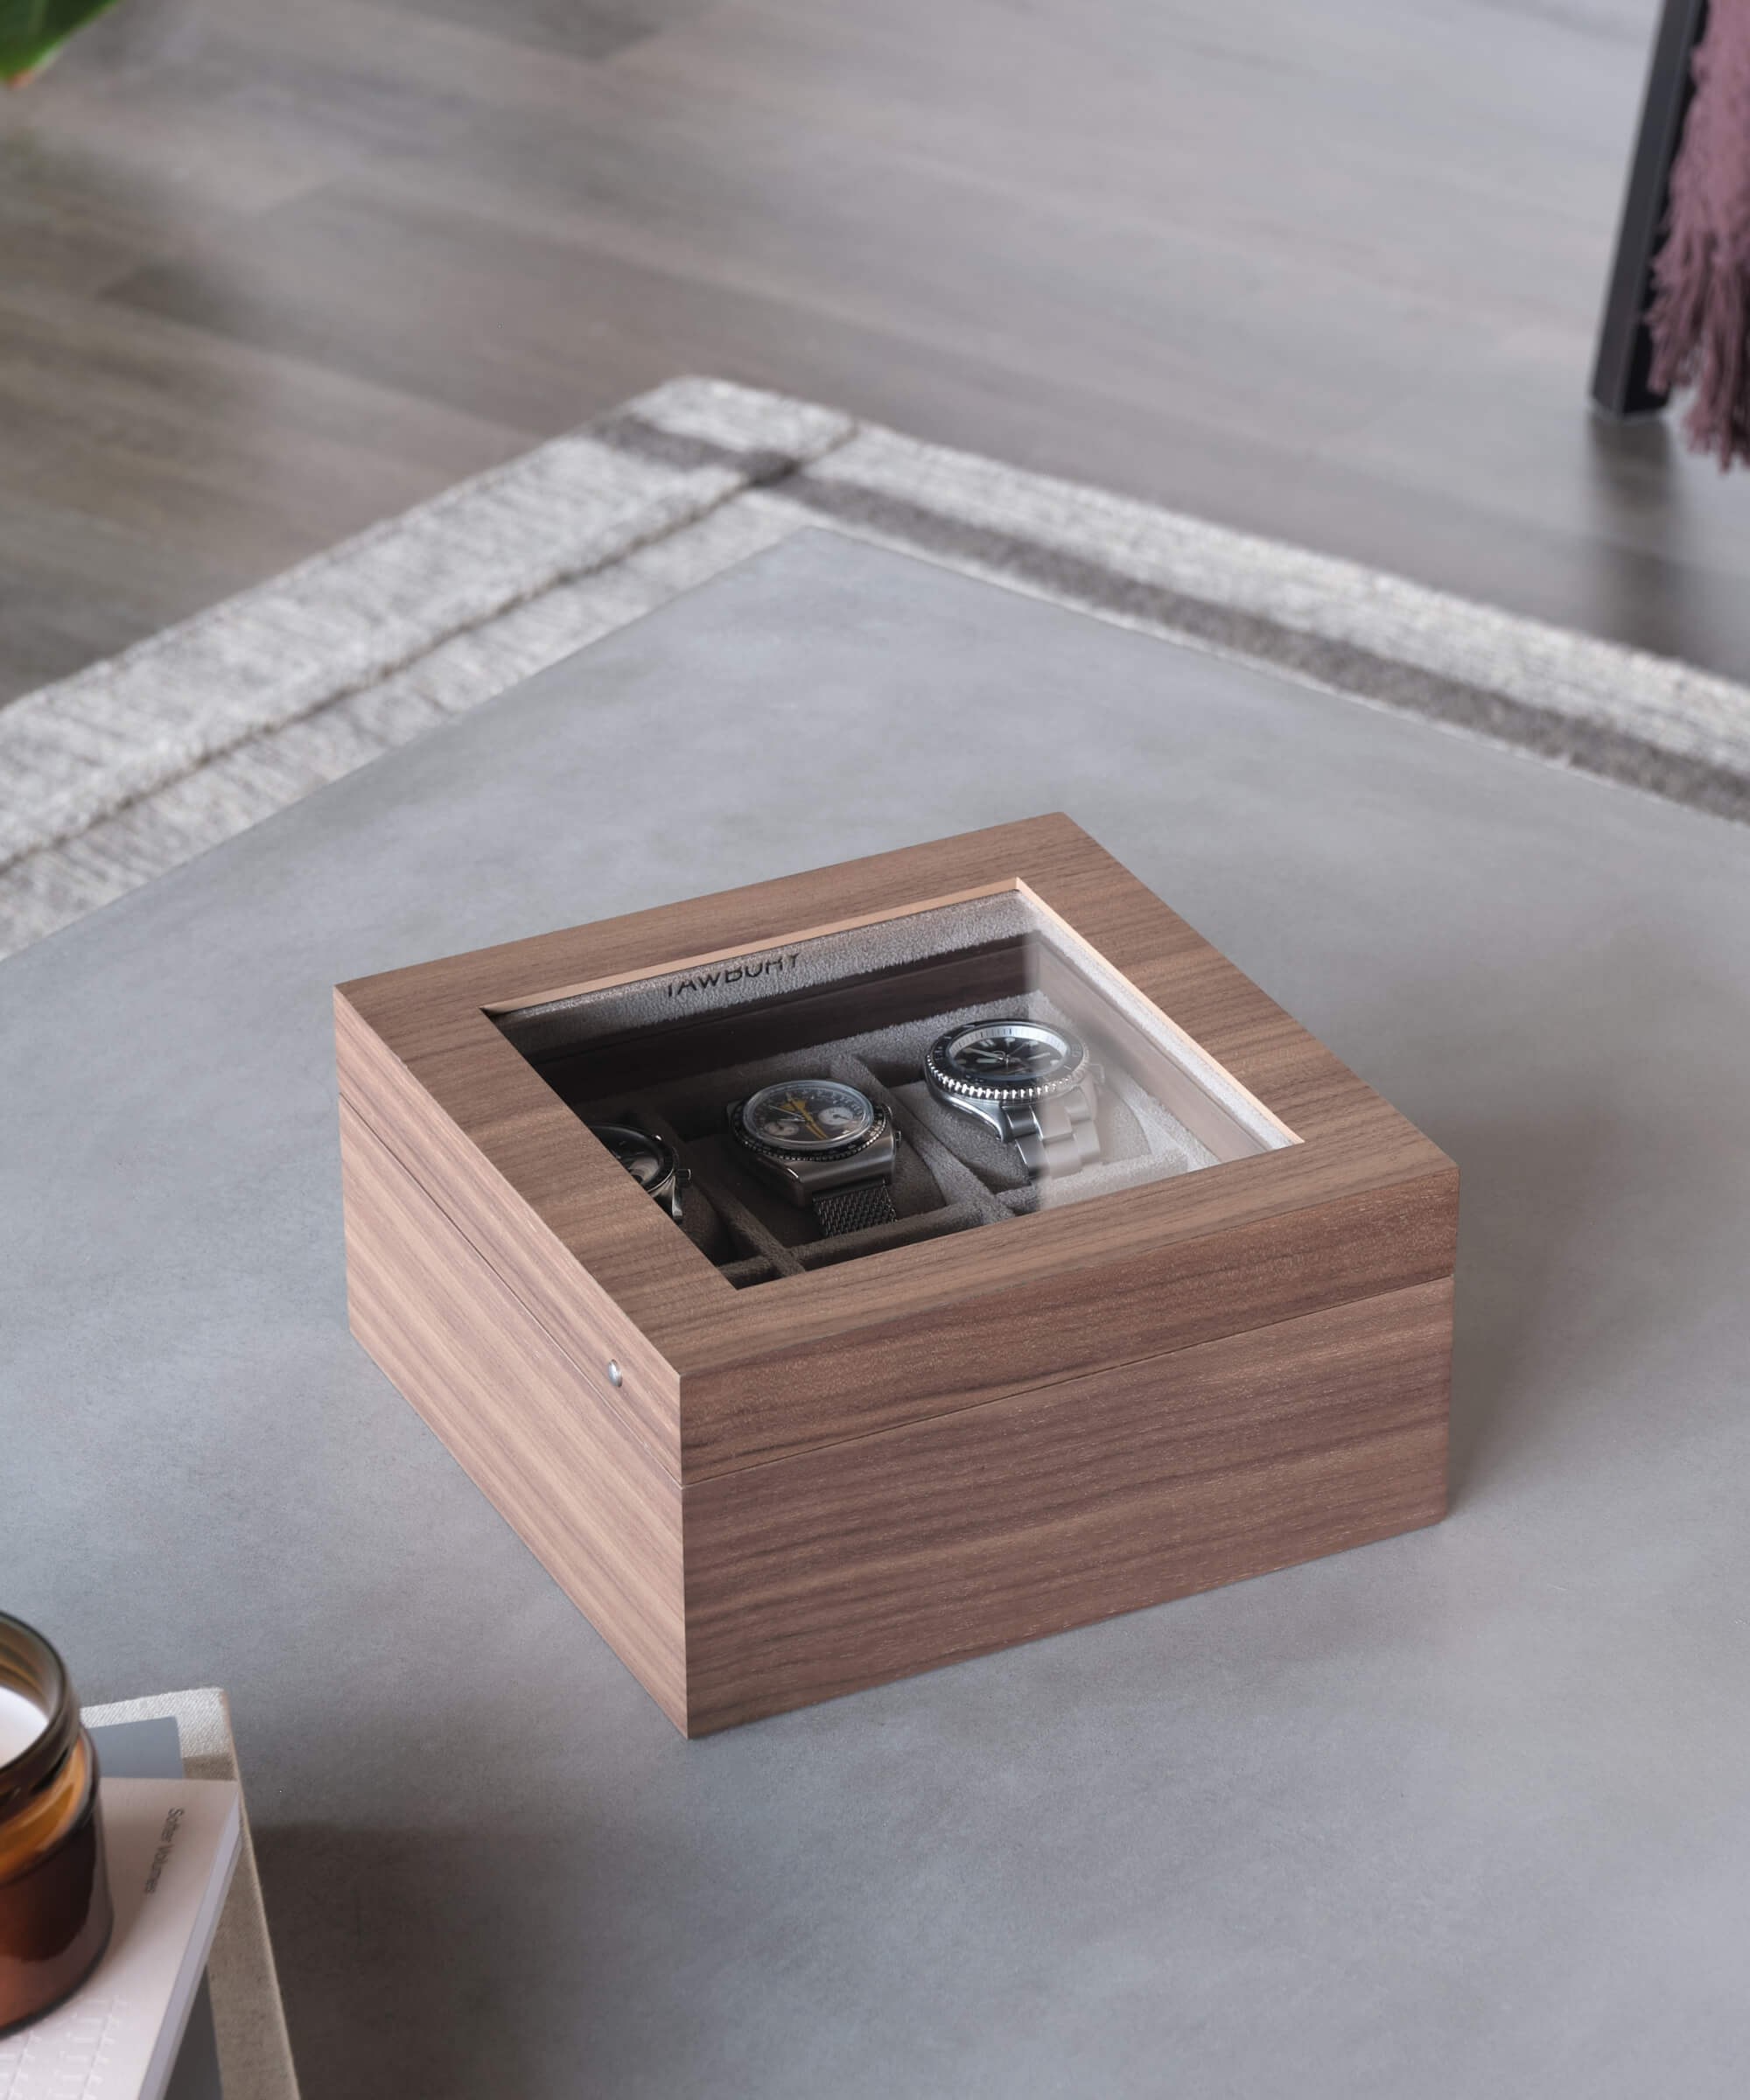 A TAWBURY Grove 6 Slot Watch Box with Glass Lid - Walnut on a table next to a coffee table, perfect for watch enthusiasts.